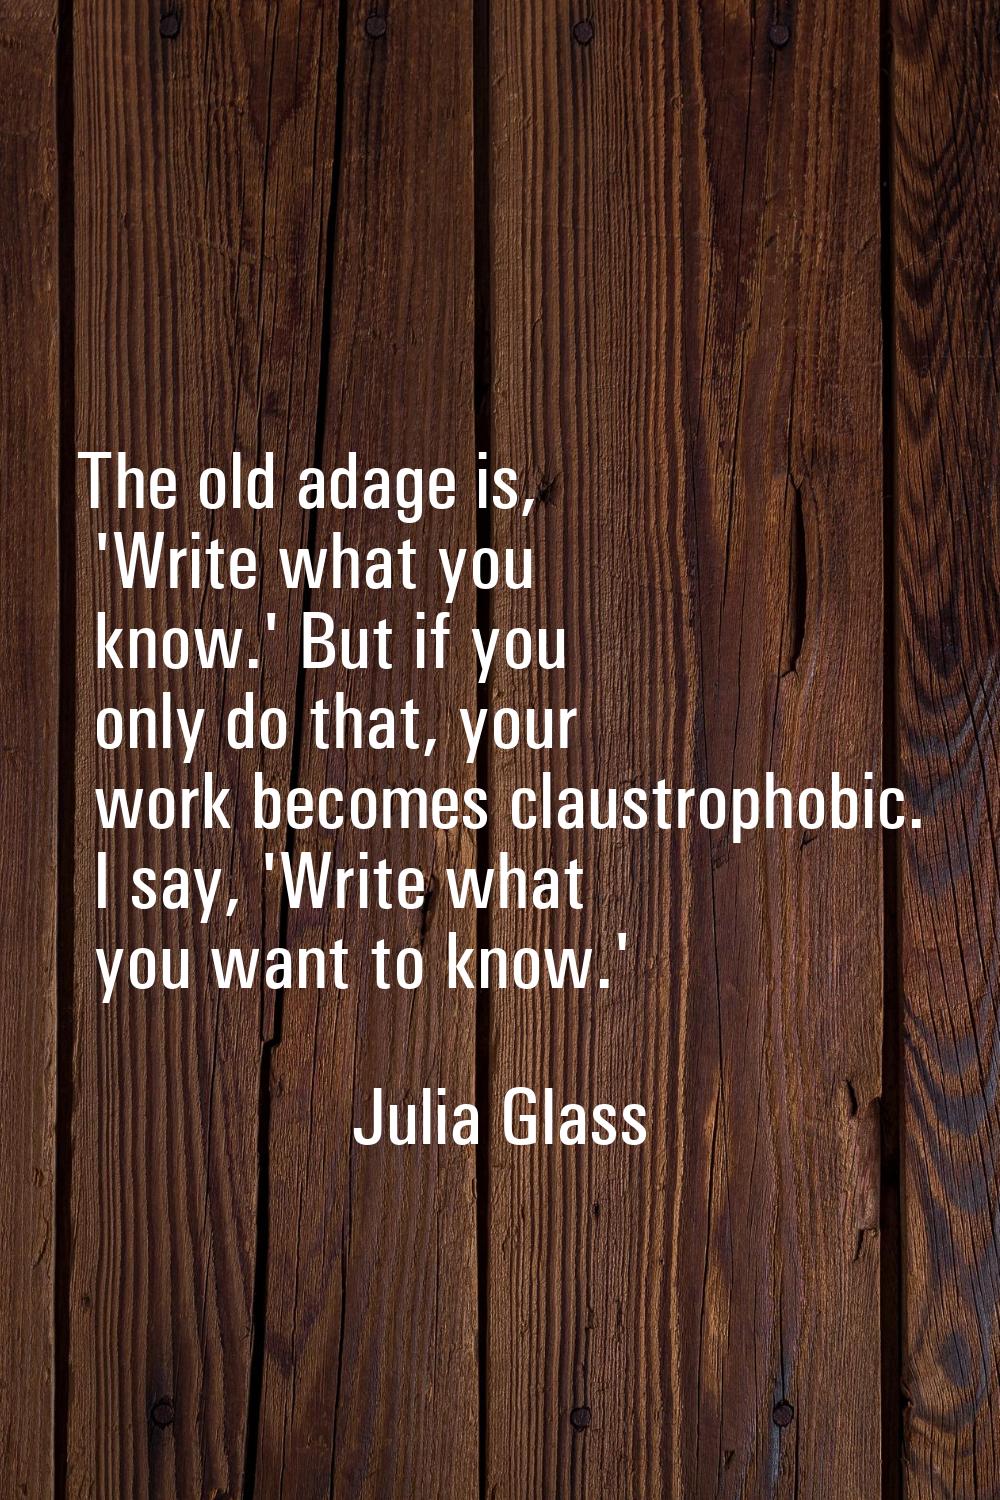 The old adage is, 'Write what you know.' But if you only do that, your work becomes claustrophobic.